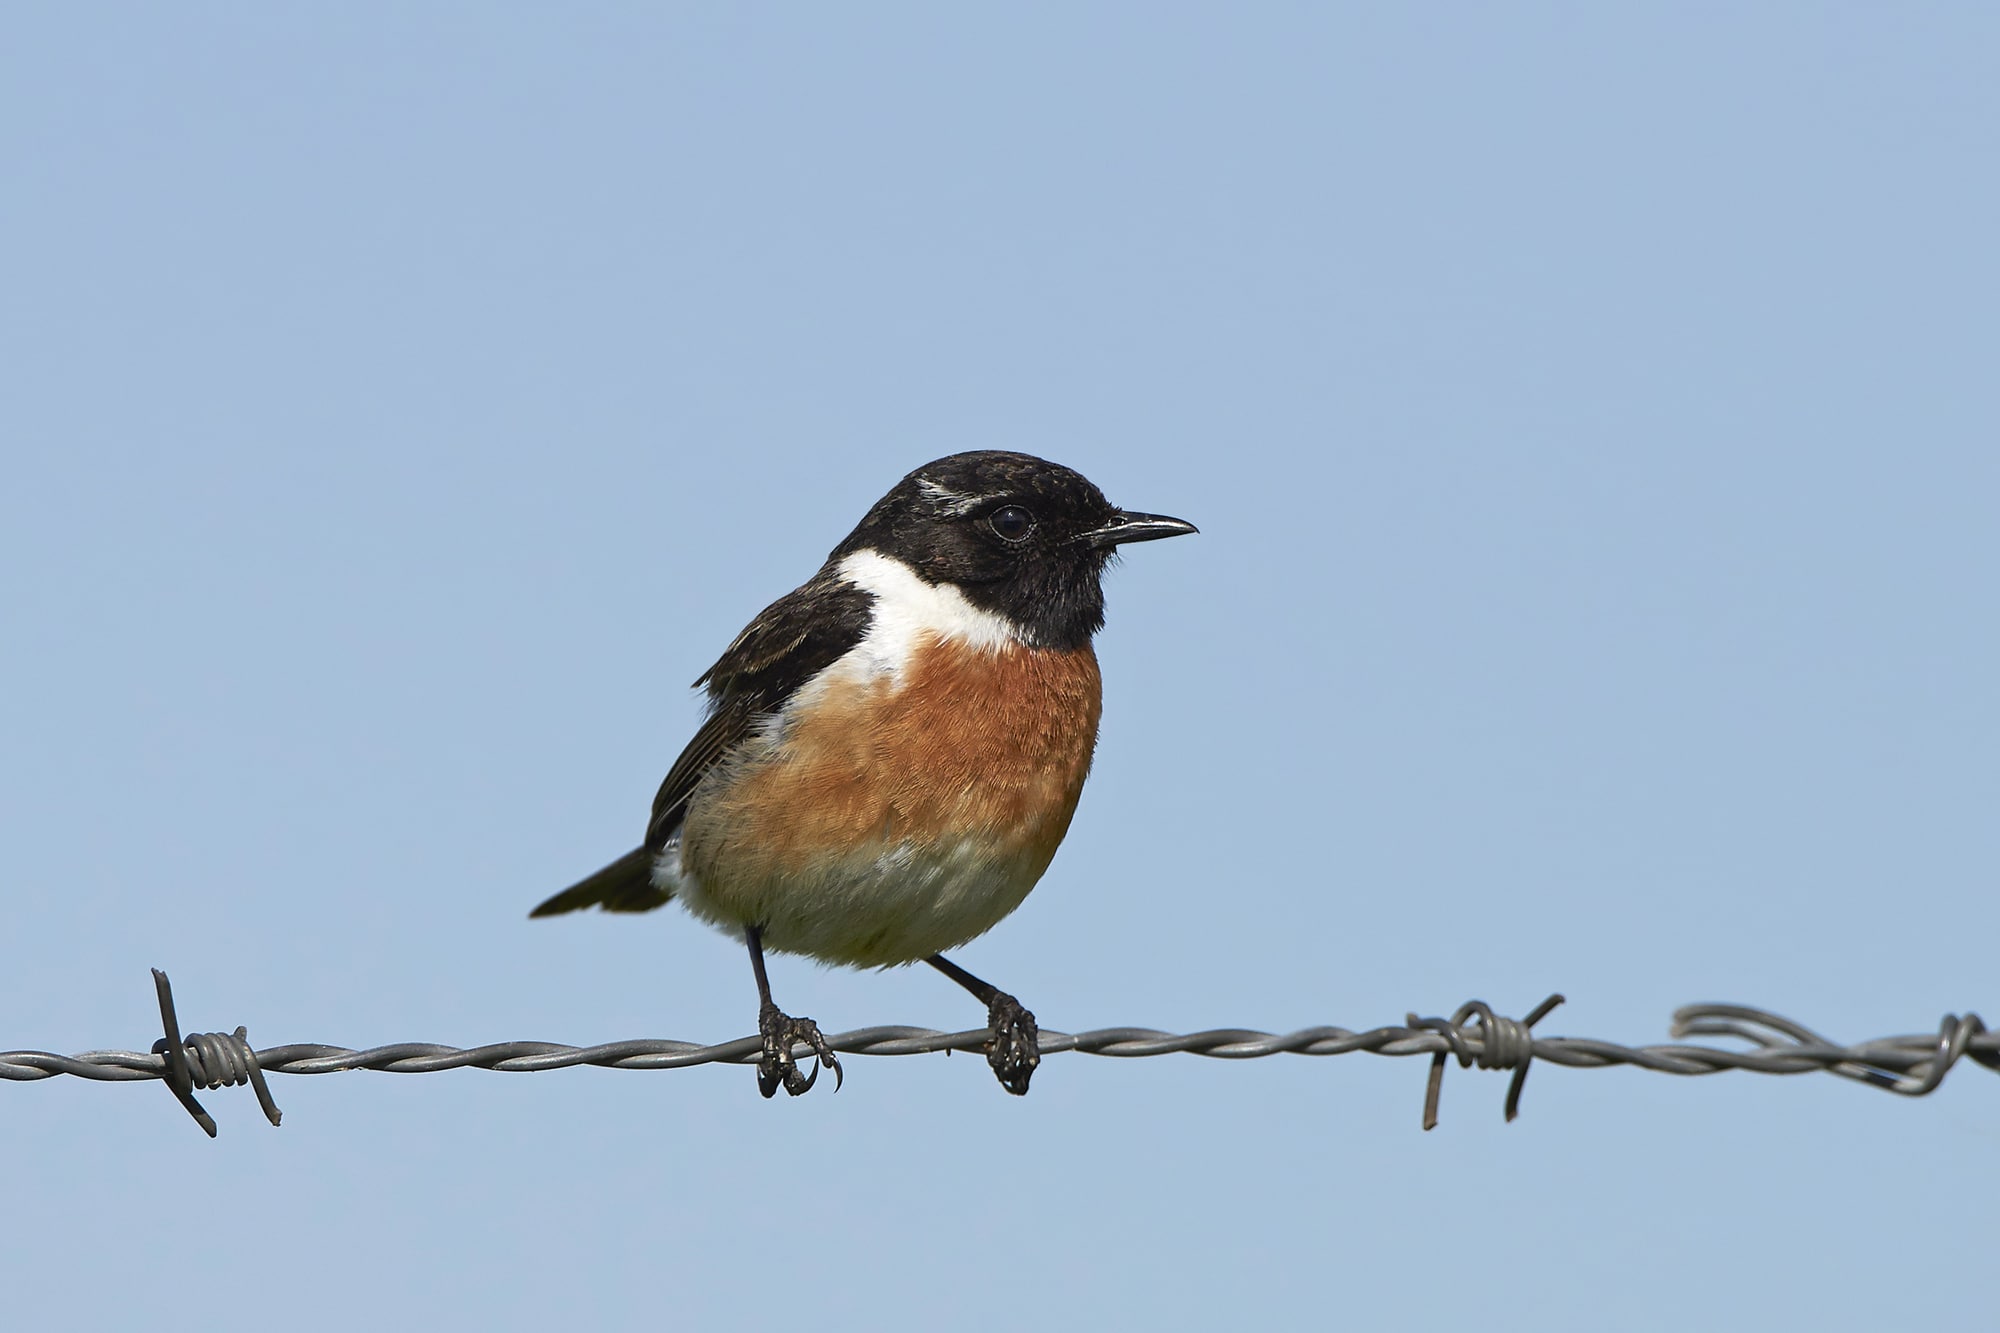 European stonechat resting on a barb wire with blue skies in the background